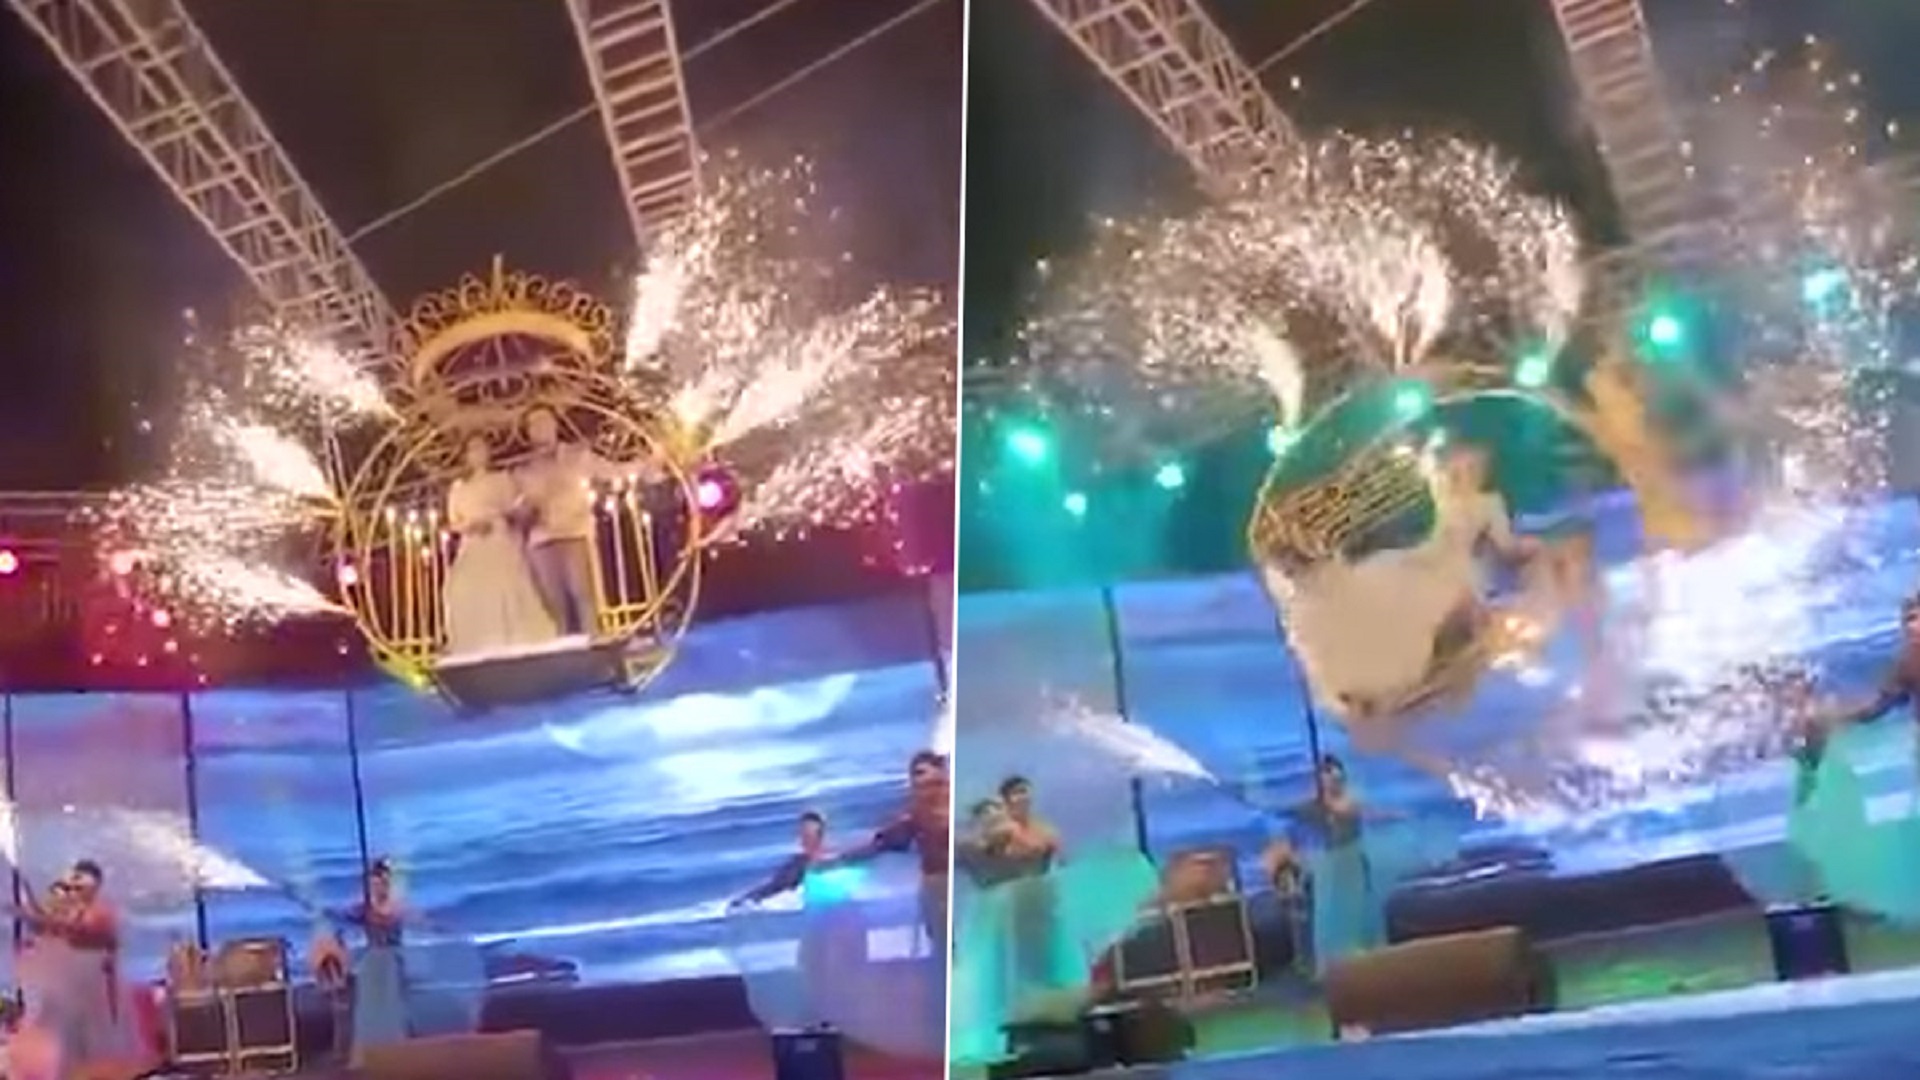 Bride And Groom Fall From Crane During Their Dramatic Wedding Entry [Video]